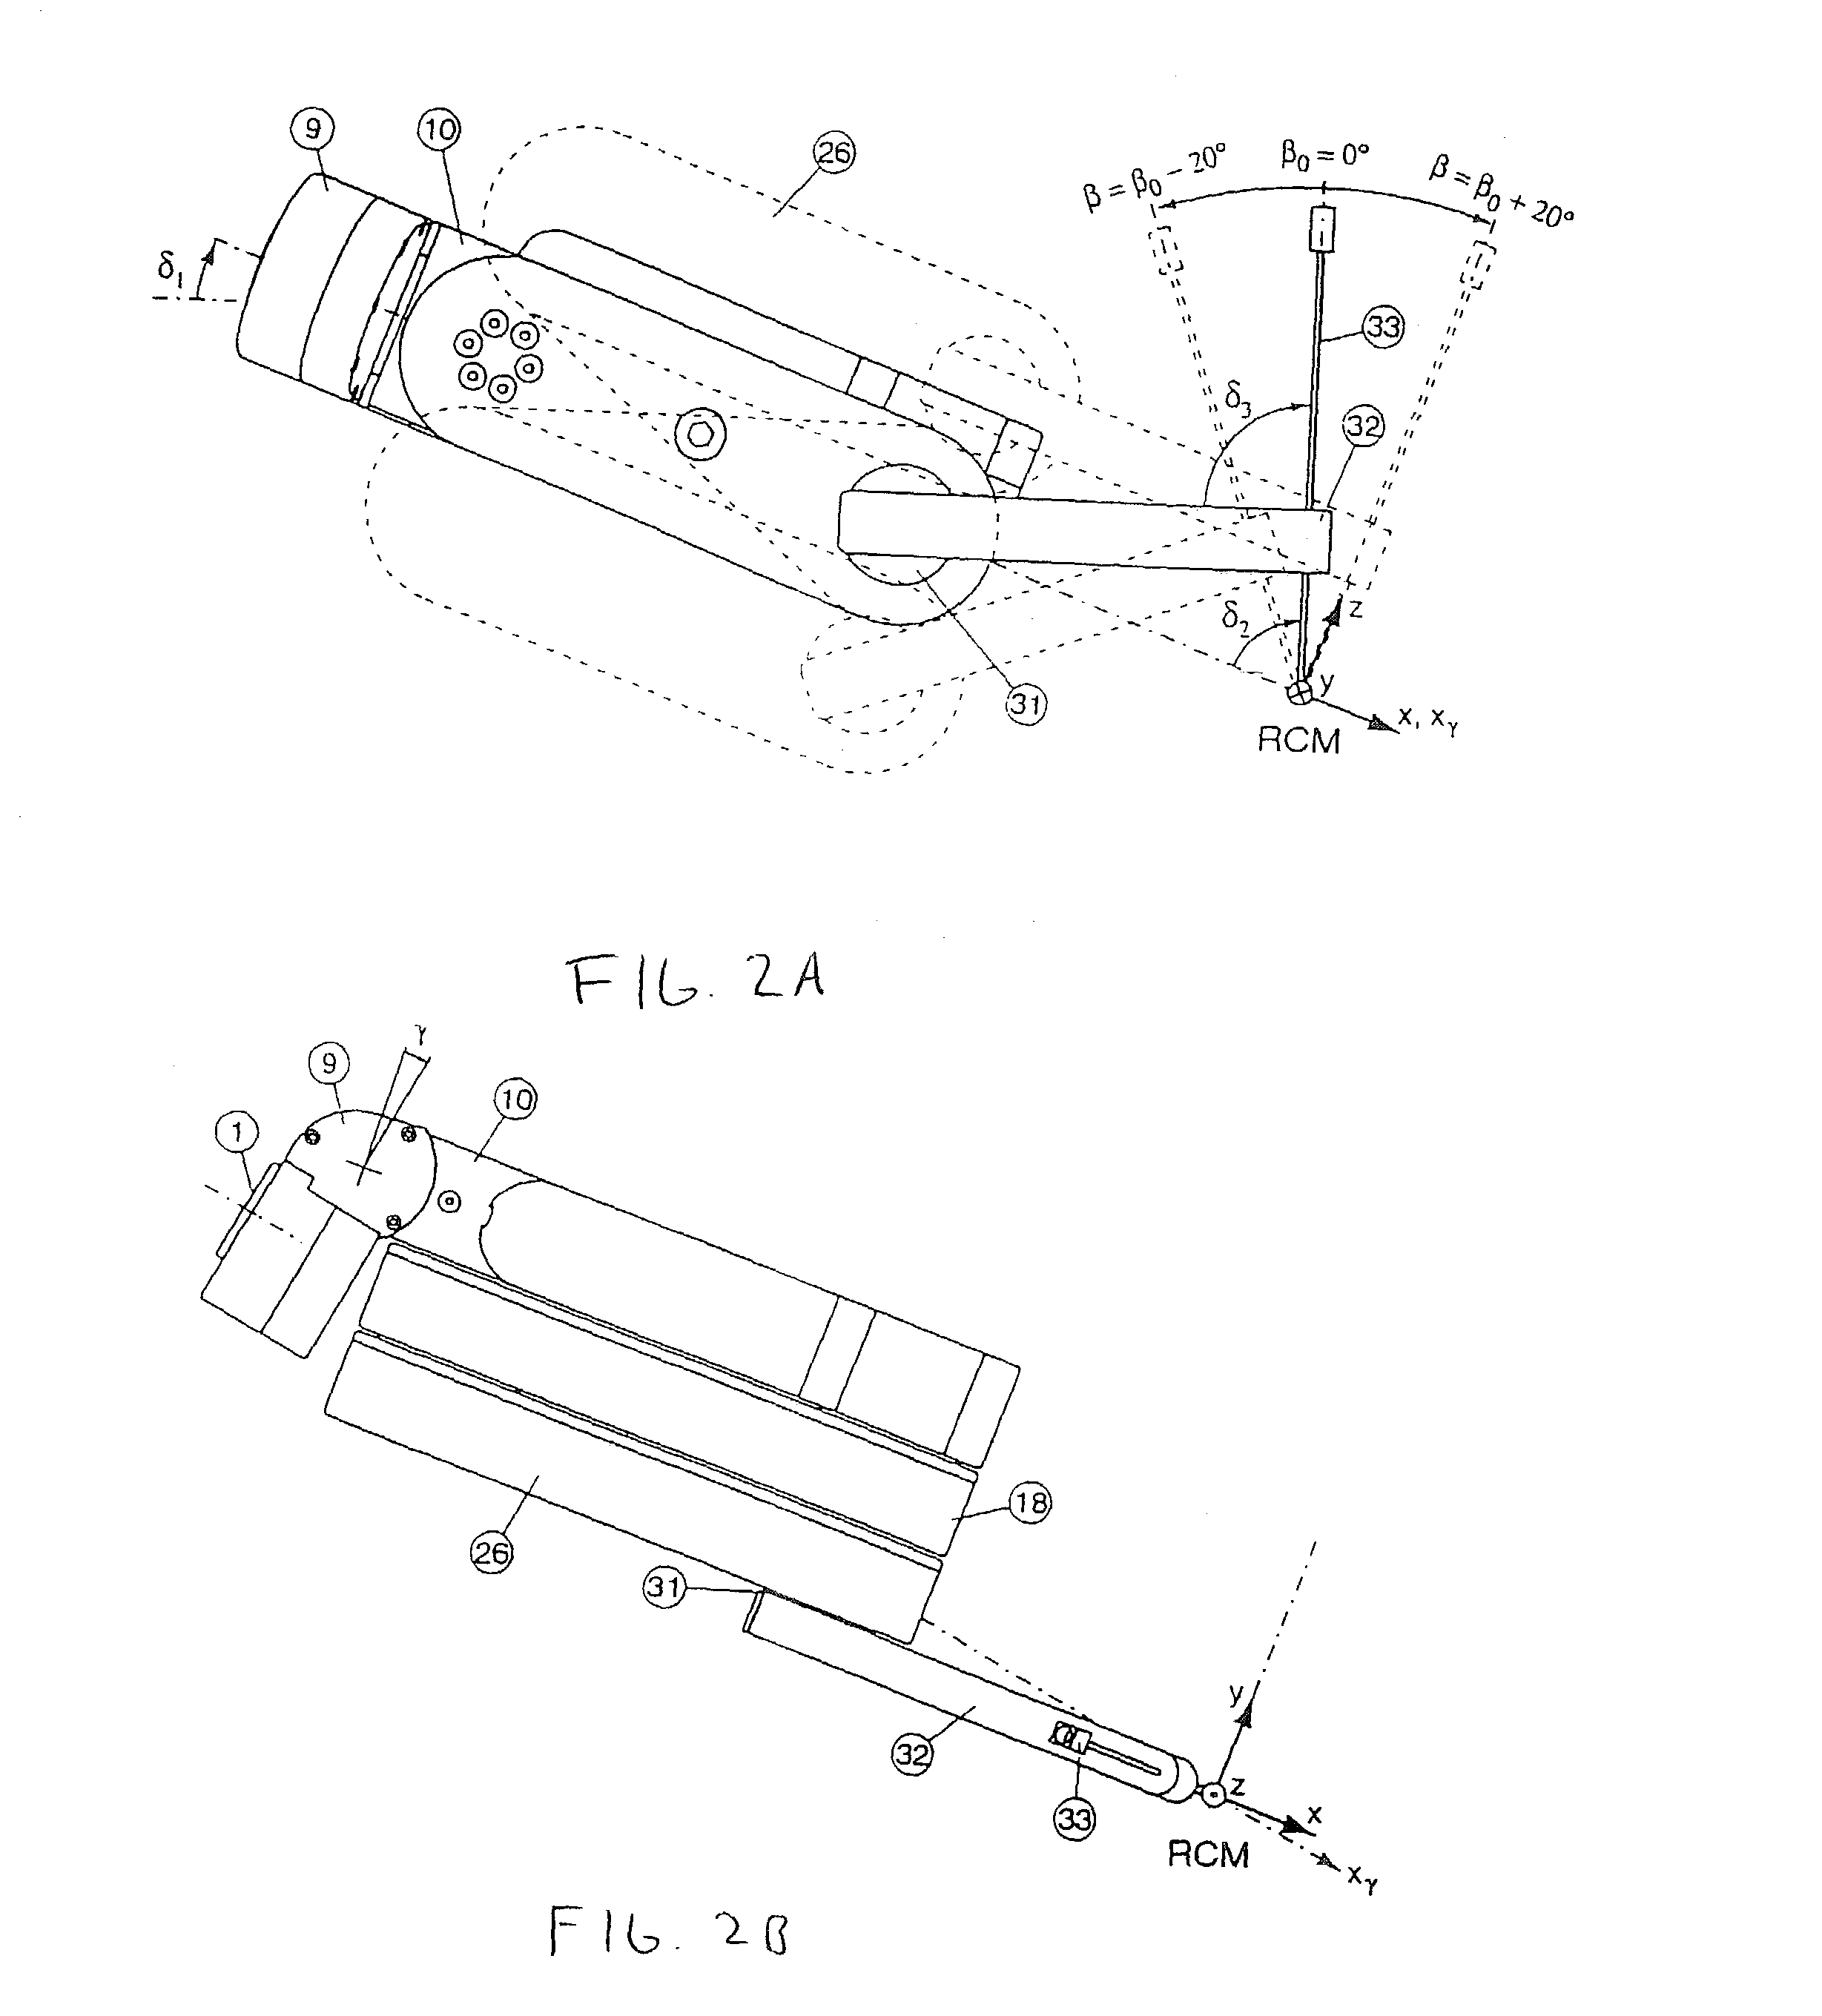 Remote center of motion robotic system and method